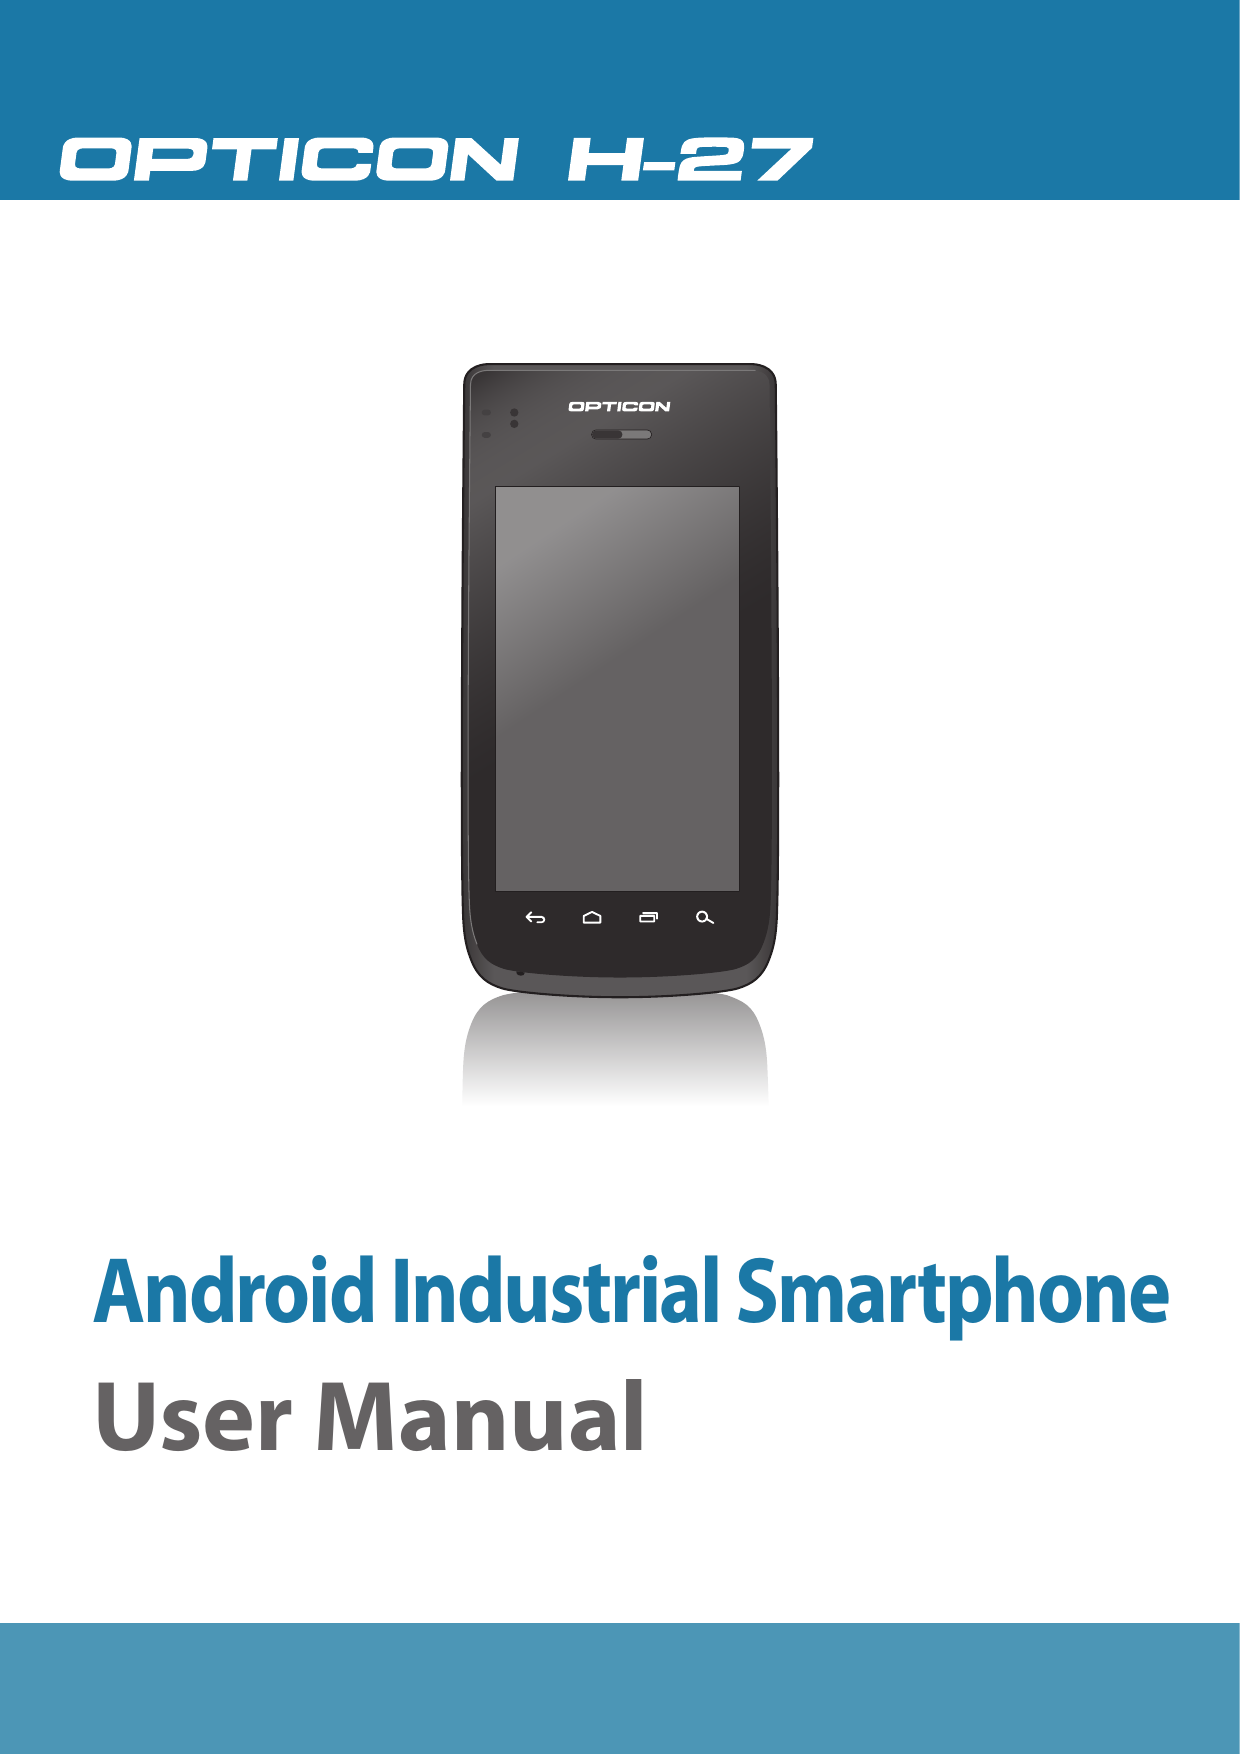 Android Industrial SmartphoneUser Manual